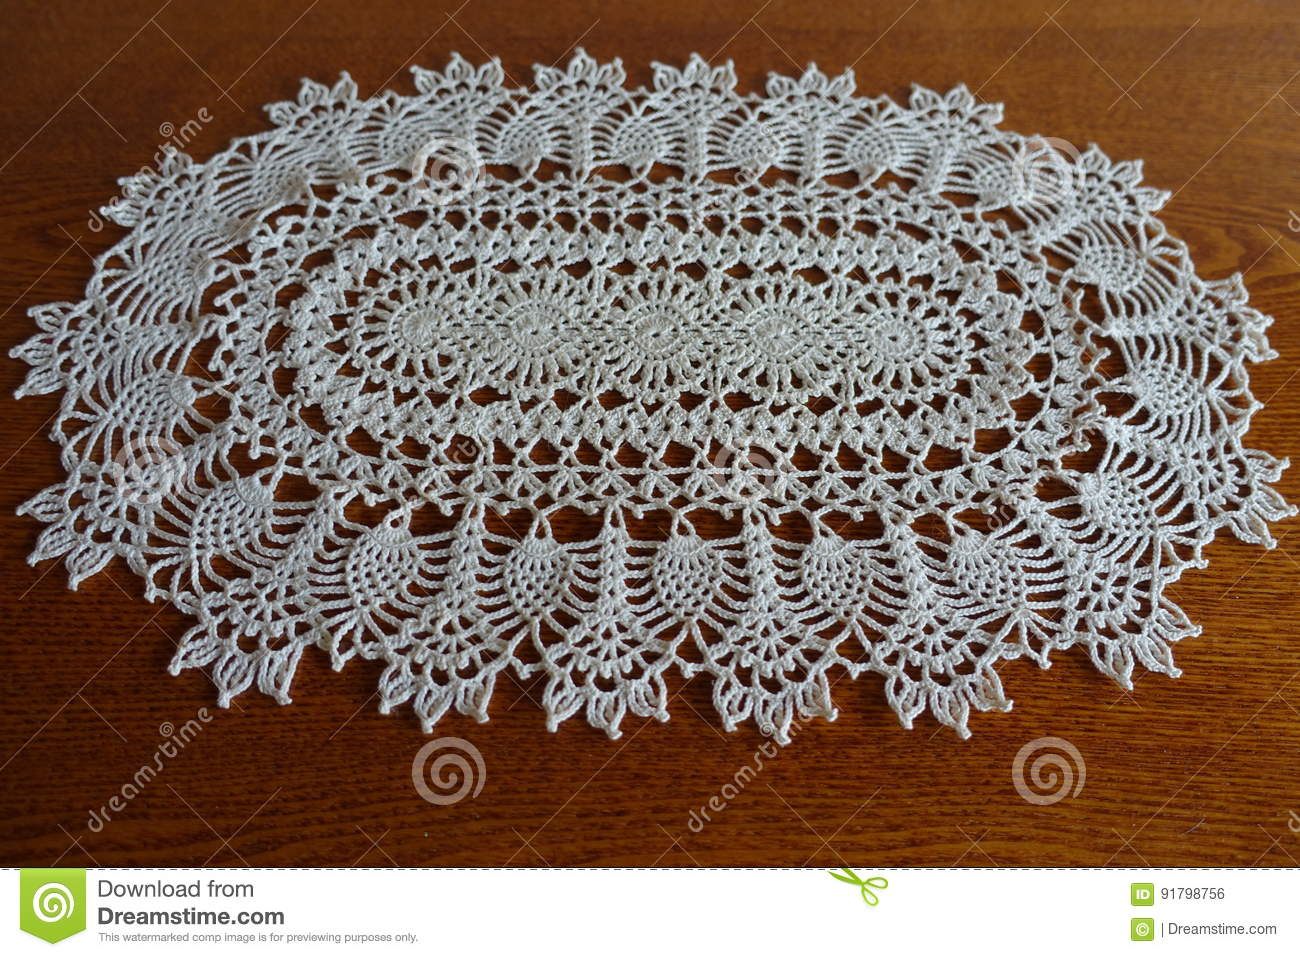 Free Crochet Oval Tablecloth Patterns Oval White Handmade Crochet Lace Doily On Wood Stock Photo Image